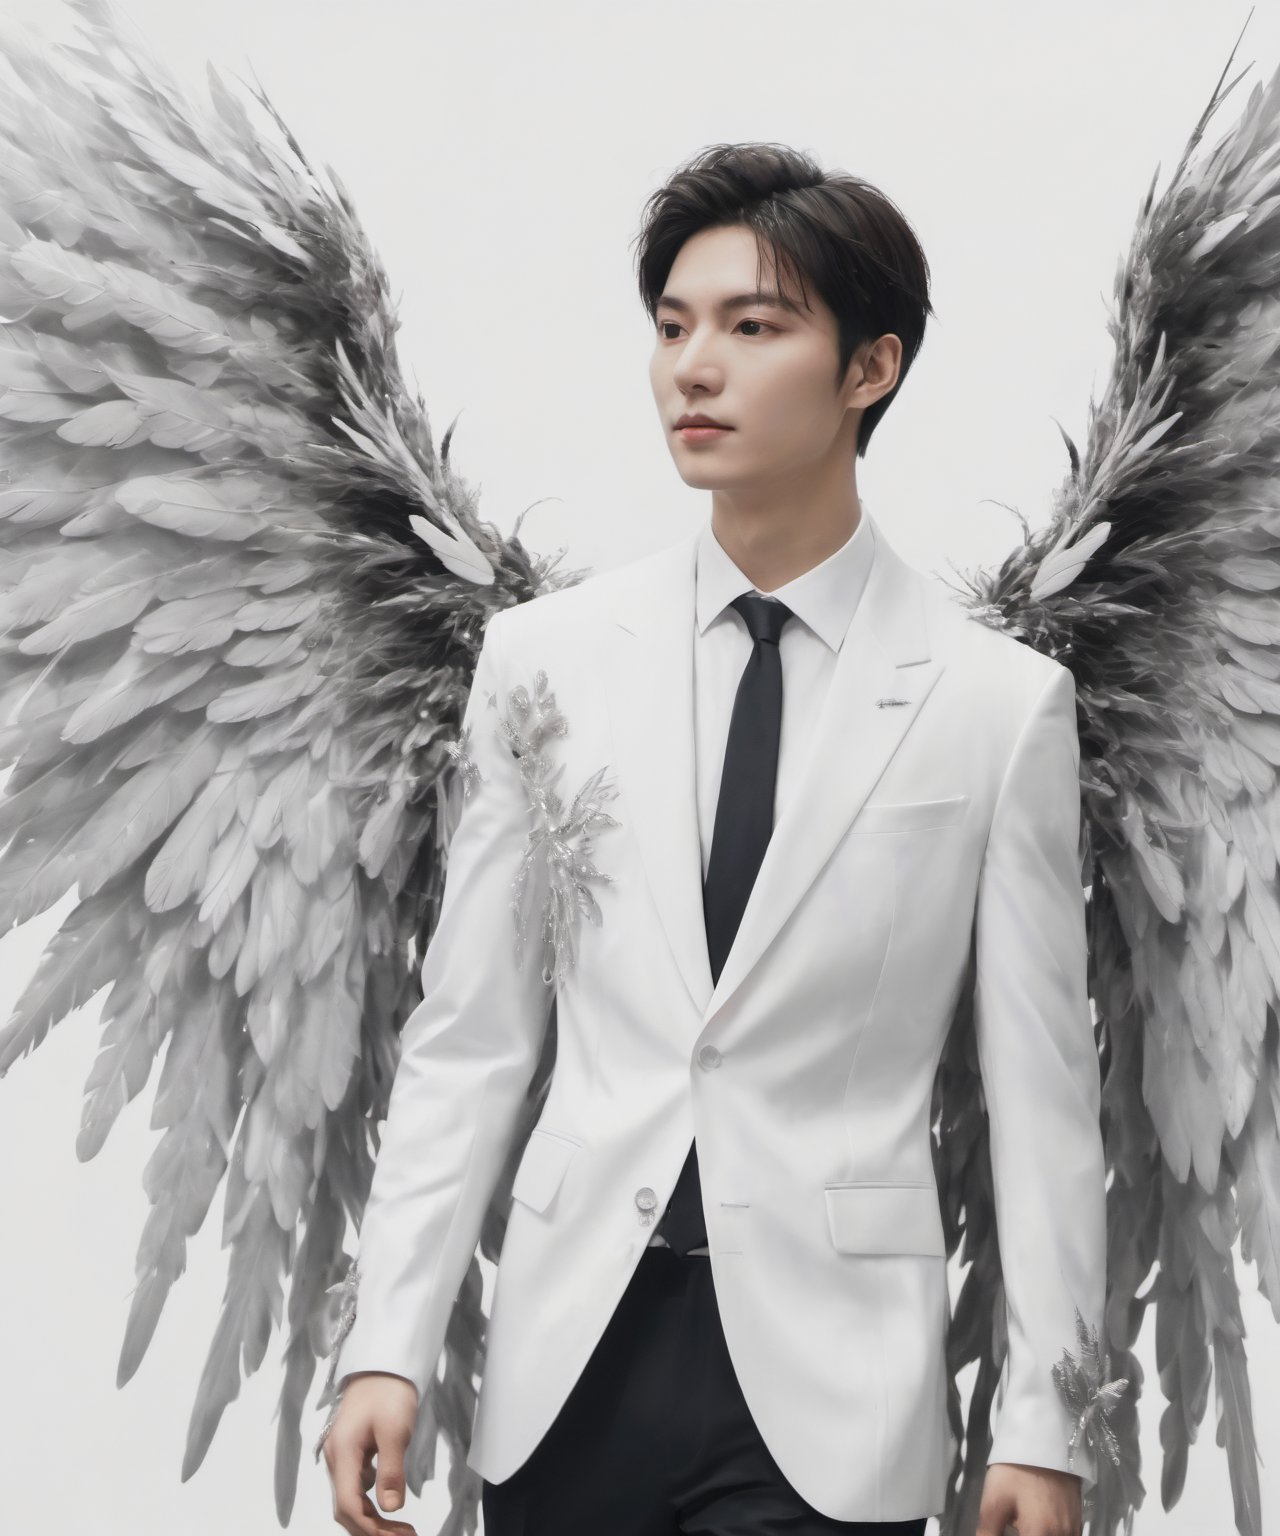 Create an image of a young man wearing a suit, featuring vibrant, crystal giant's  wings extending from his back. Random movement The background should be plain white, emphasizing the contrast and detailing of the beauty wings and the sharpness of the suit. The man should appear poised and elegant, with the wings unfurled to showcase a spectrum of vivid hues, blending seamlessly from one color to another. The focus should be on the meticulous details of the wings’ feathers and the suit’s fabric, capturing a harmonious blend of natural and refined elements, wings,Stylish, close up,l3min,wings,xxmixgirl